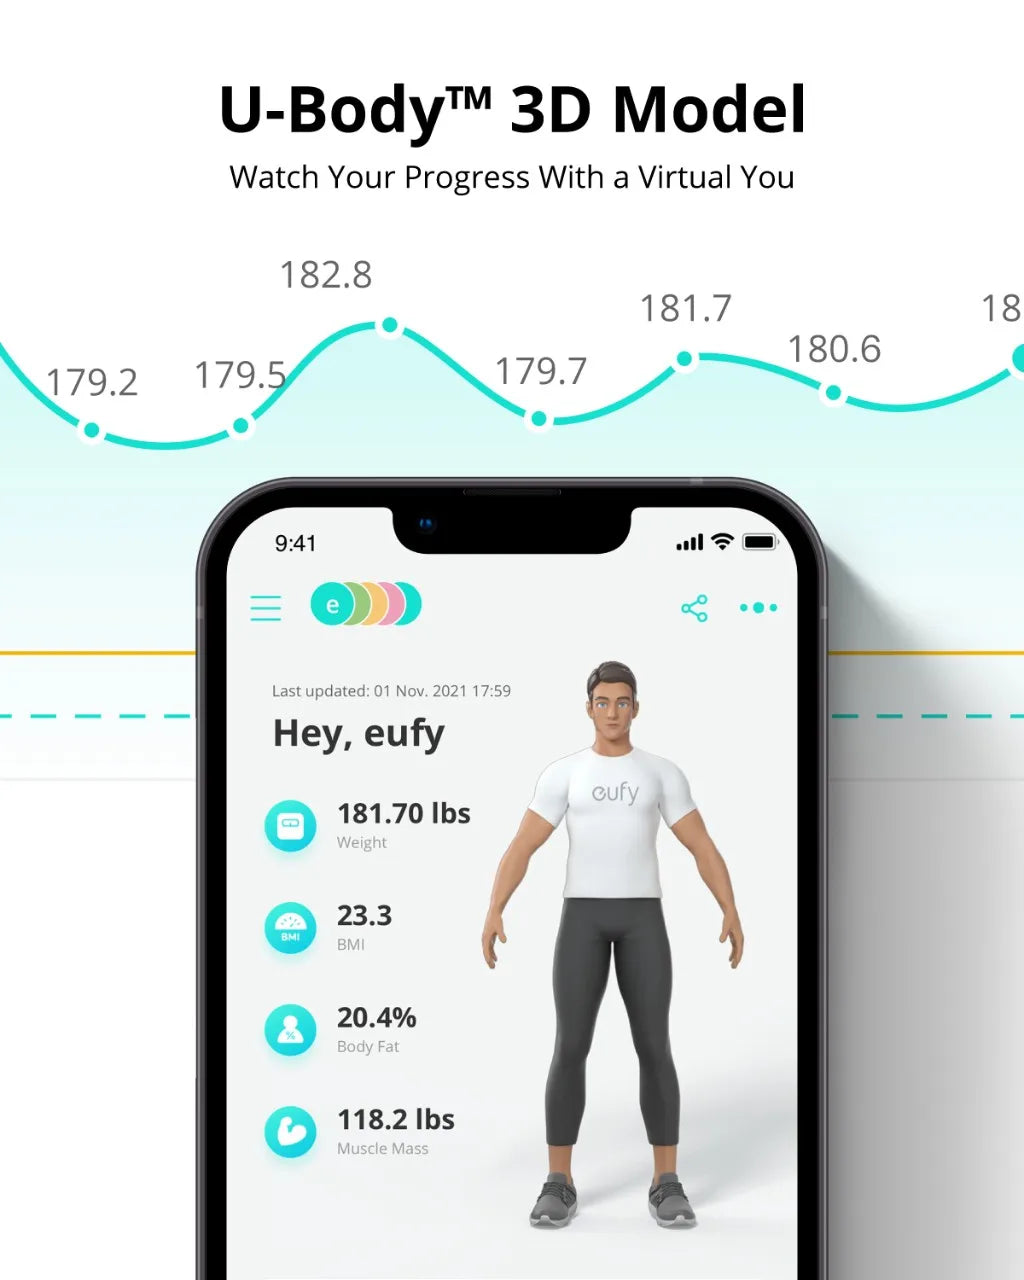 Eufy Smart Scale P2 Digital Bathroom Scale with Wi-Fi Bluetooth15 Measurements Including Weight, Body Fat BMI 50 g/0.1 lb ShopOnlyDeal